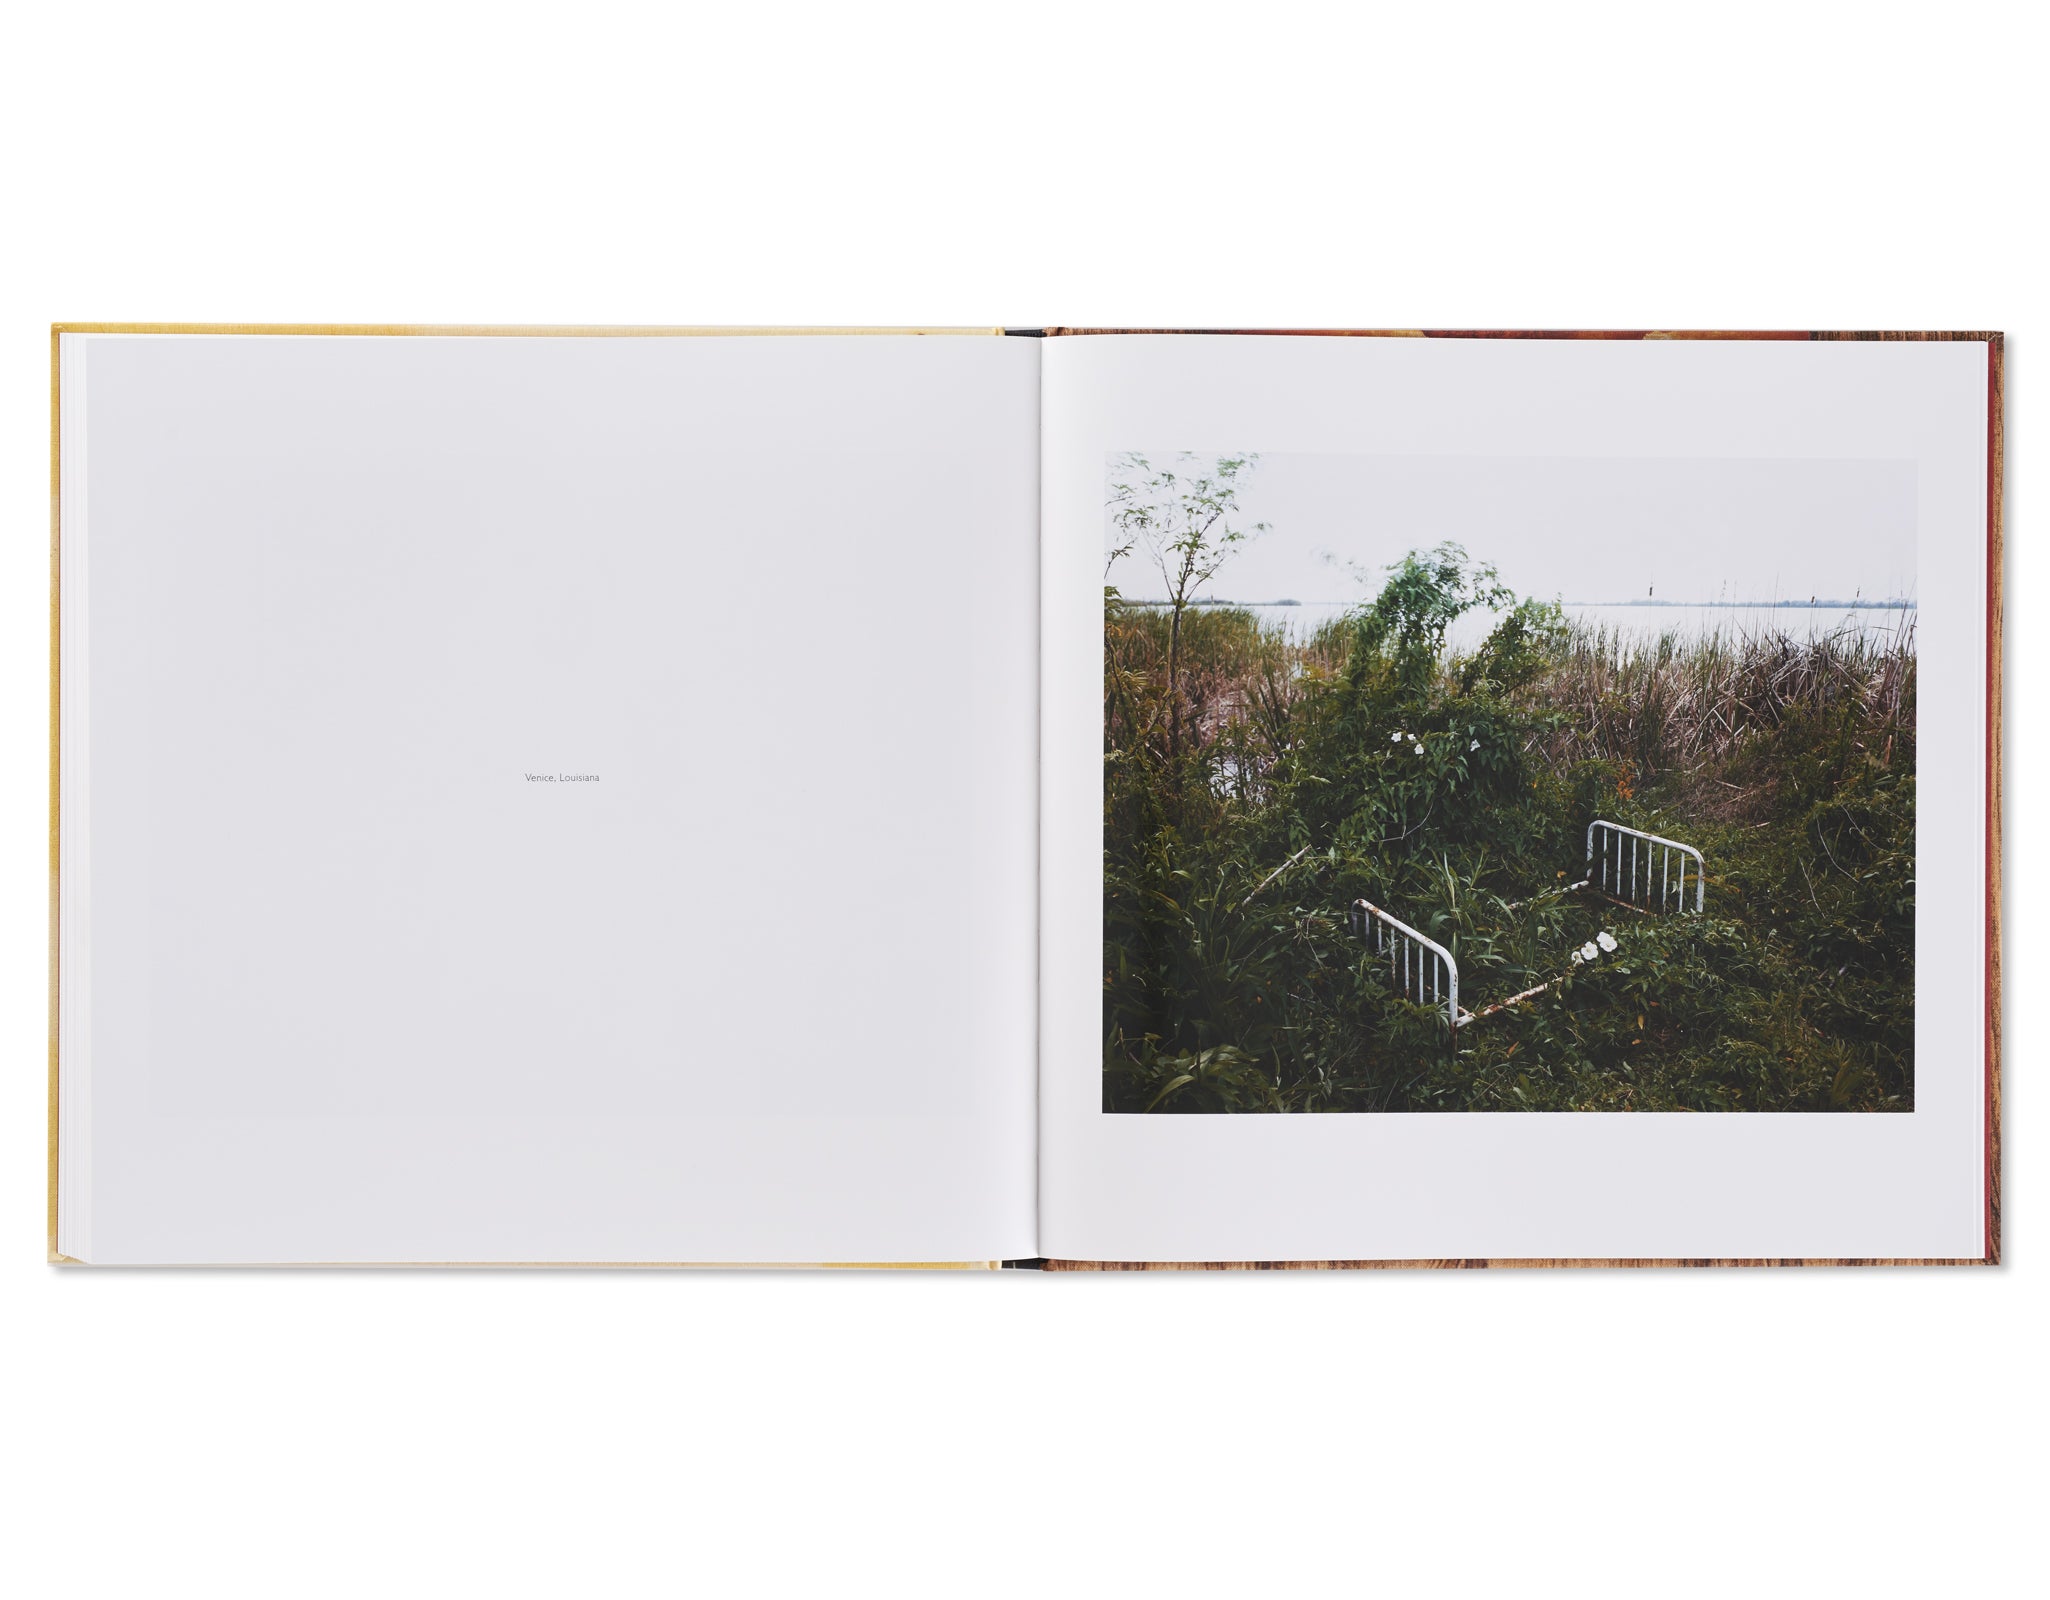 SLEEPING BY THE MISSISSIPPI by Alec Soth [SIGNED]